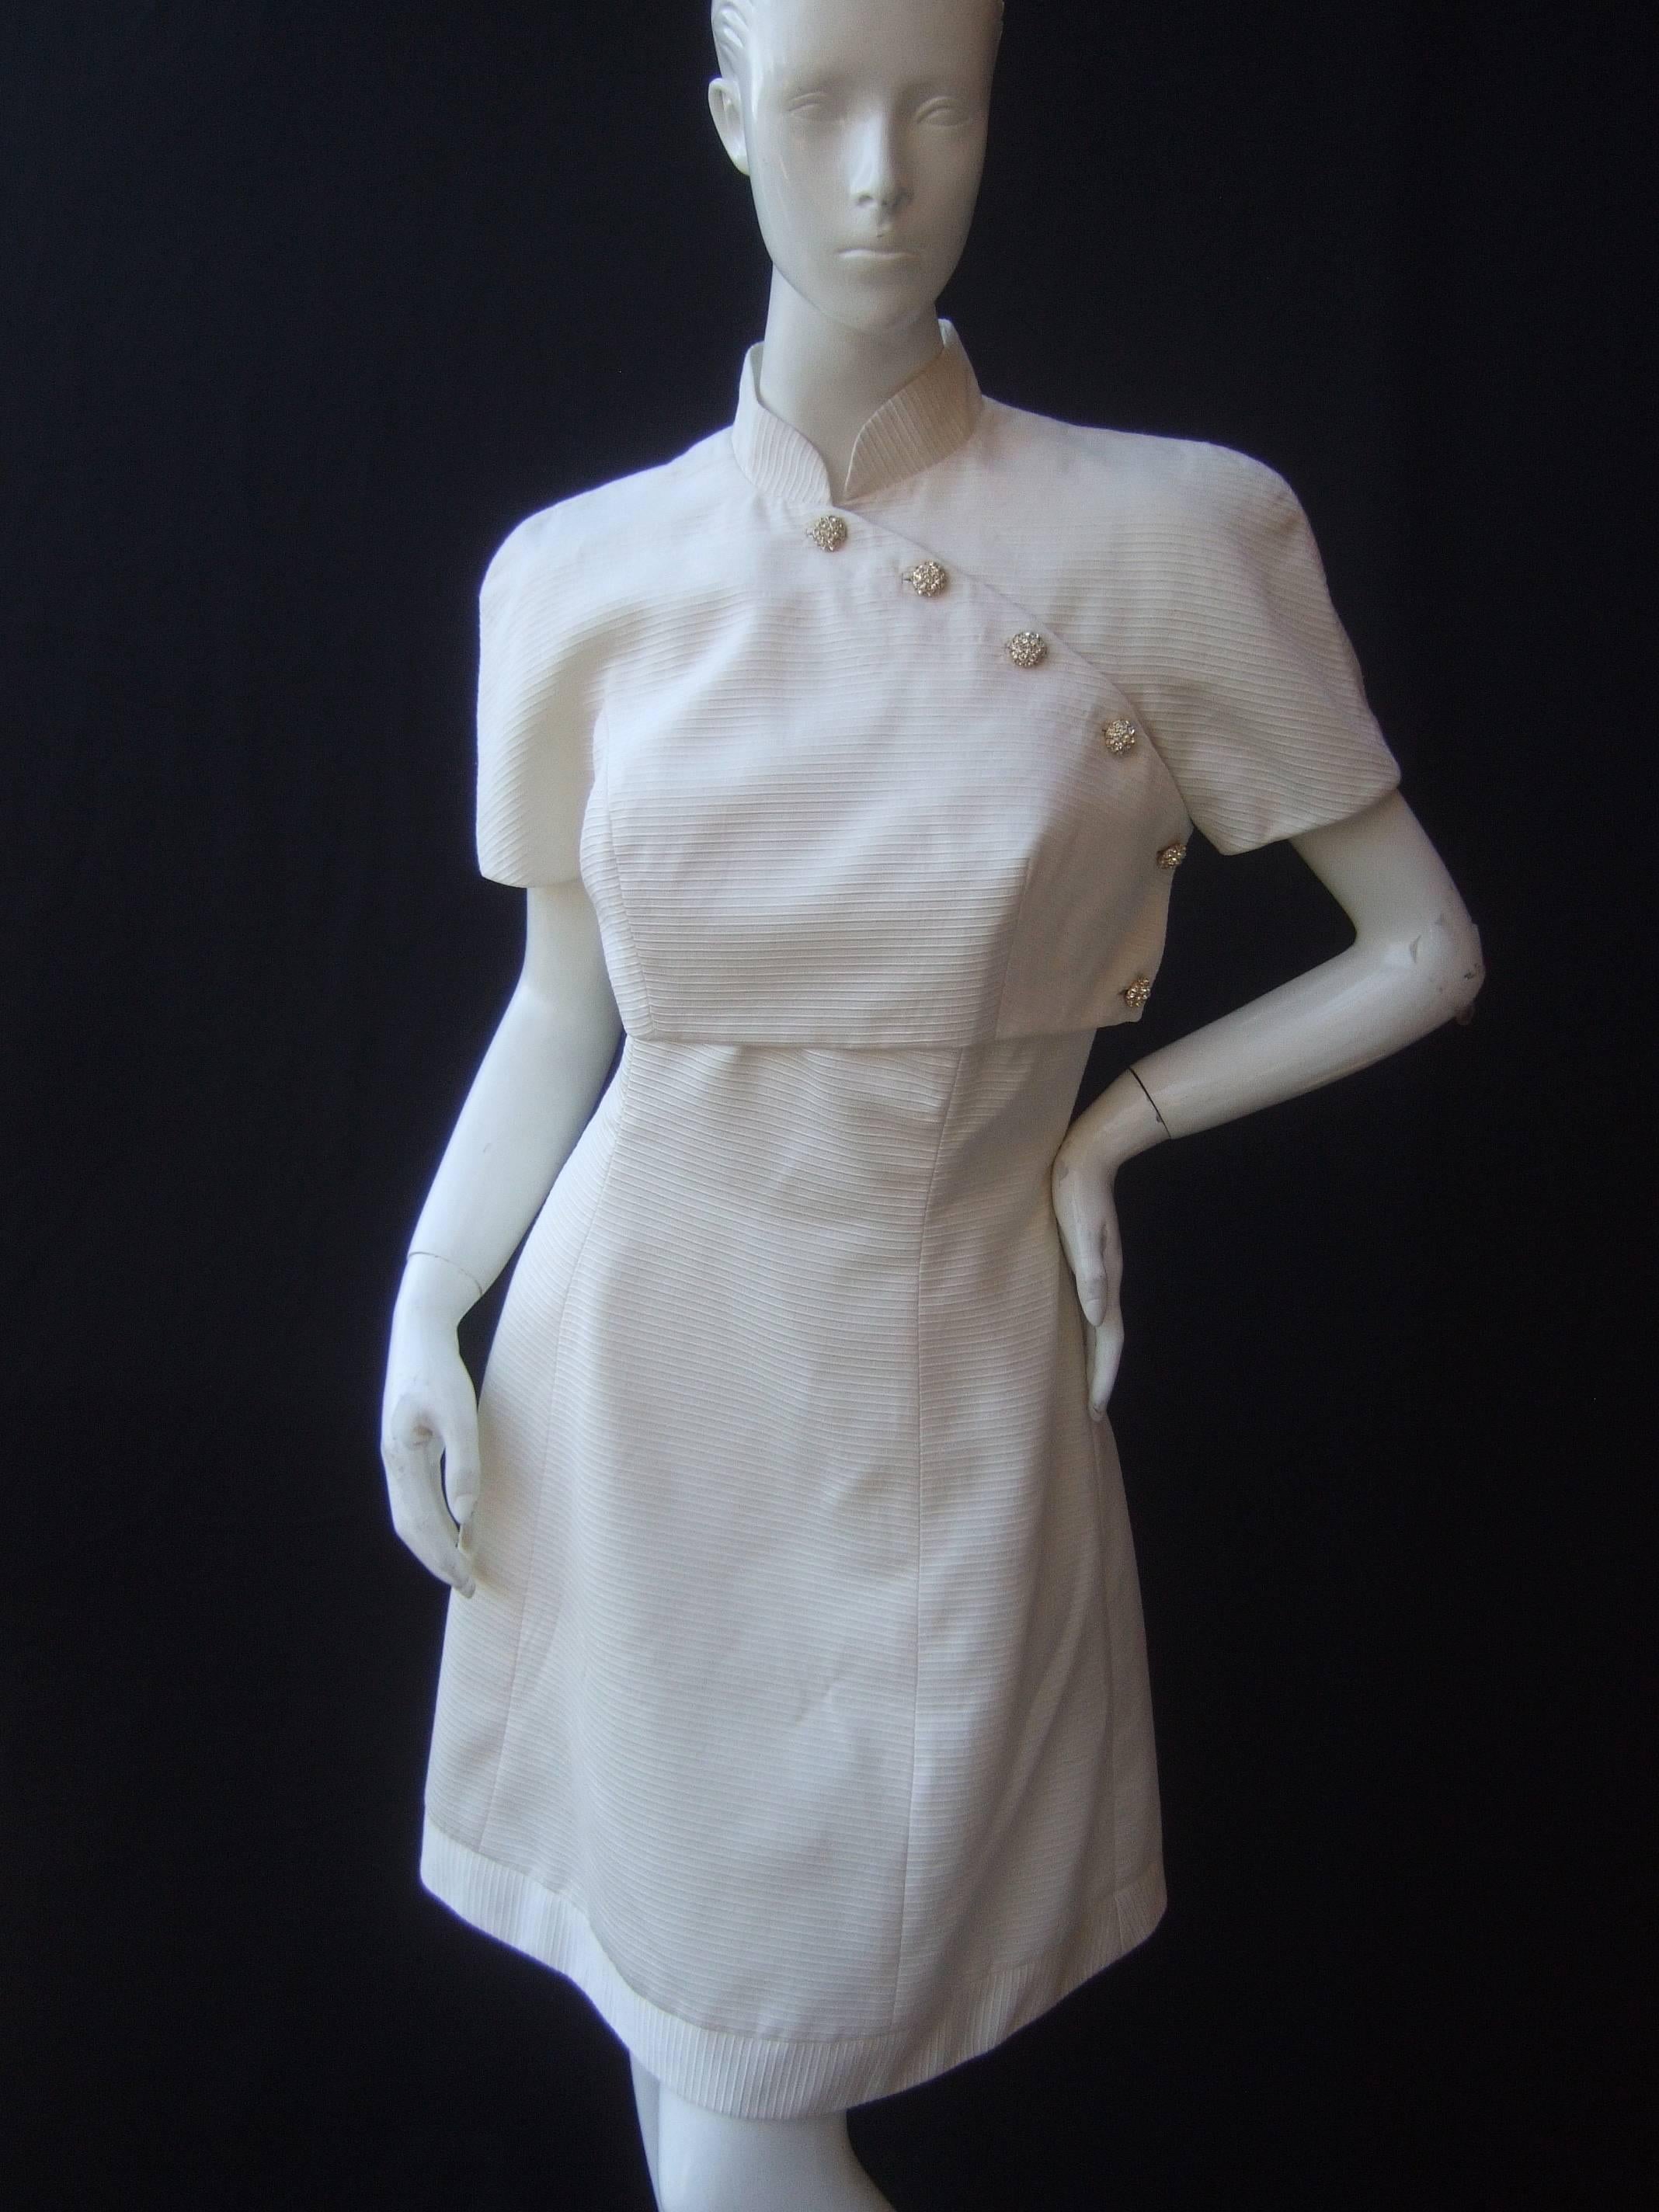 Crisp ivory jacket and dress ensemble by Fabian Molina
The stylish dress is paired with a short cropped 
sleeveless jacket embellished with diamante 
crystal buttons

The strapless cocktail dress is designed
with a heart shaped bodice